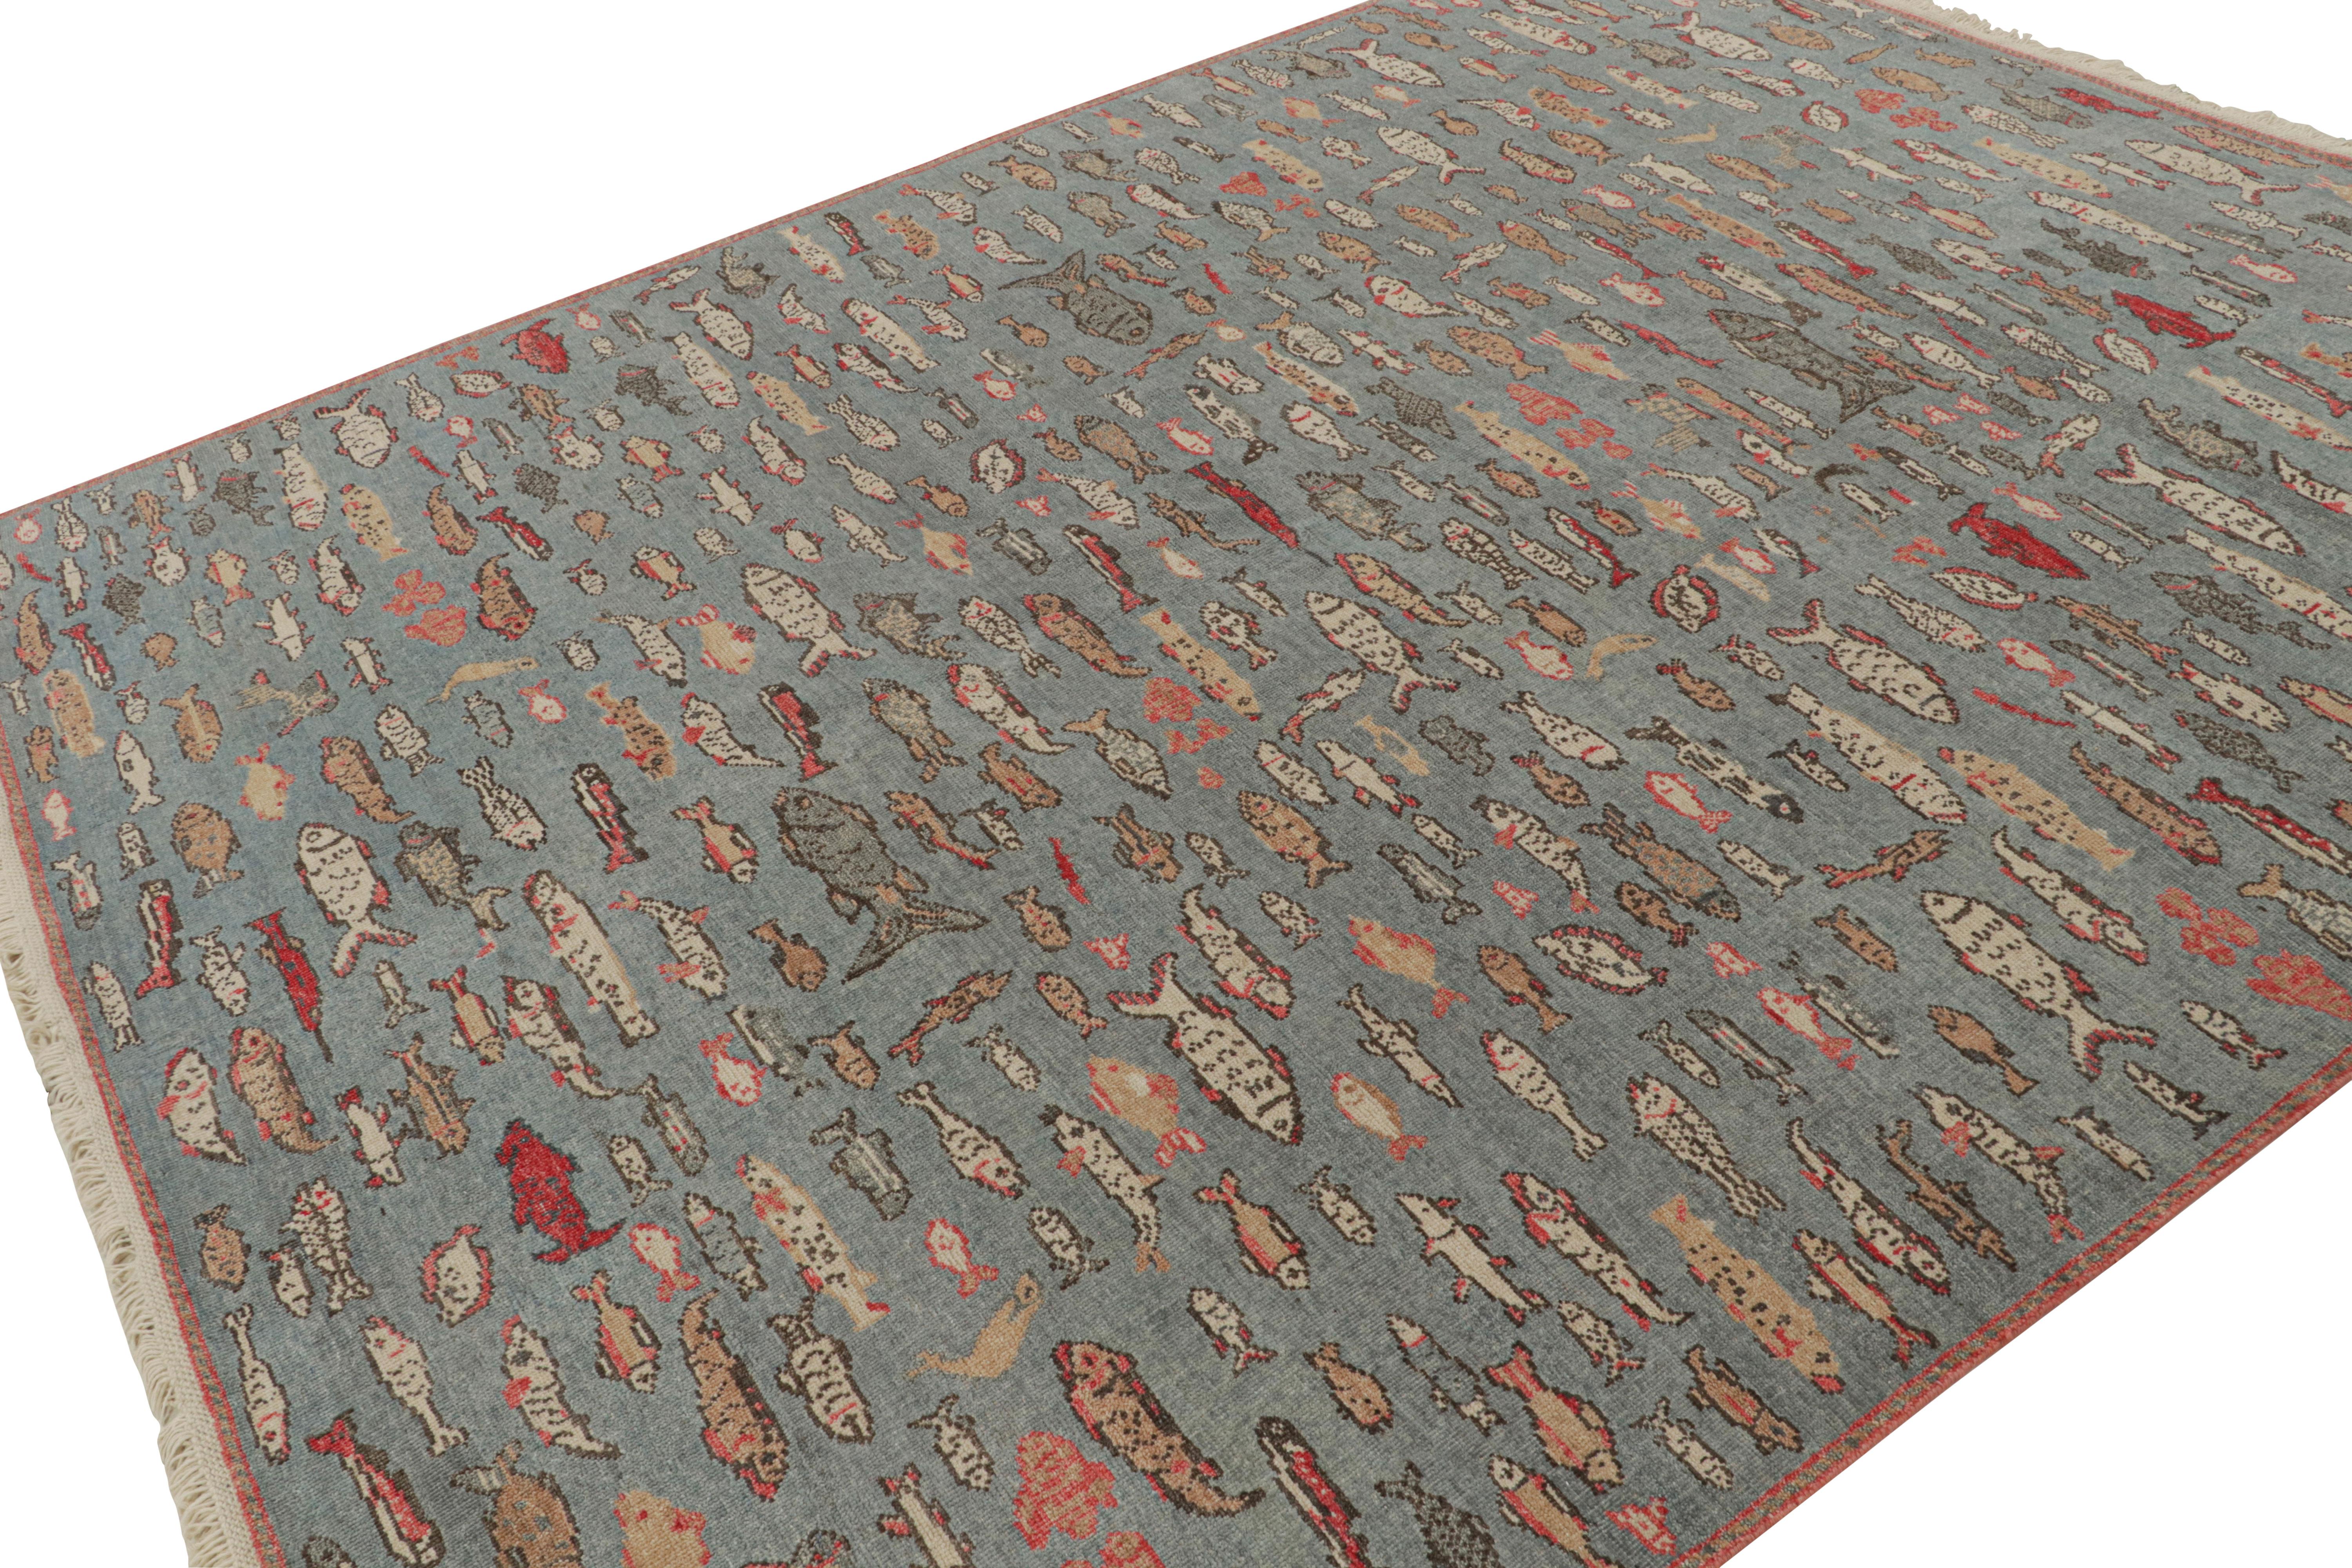 Hand knotted in Ghazni wool, this 8x10 rug is from Rug & Kilim’s Burano collection.

On the Design: 

Particularly inspired by mid-century modern pictorial art, namely a 1950s illustration of colorful fishes against an ocean blue field meant to